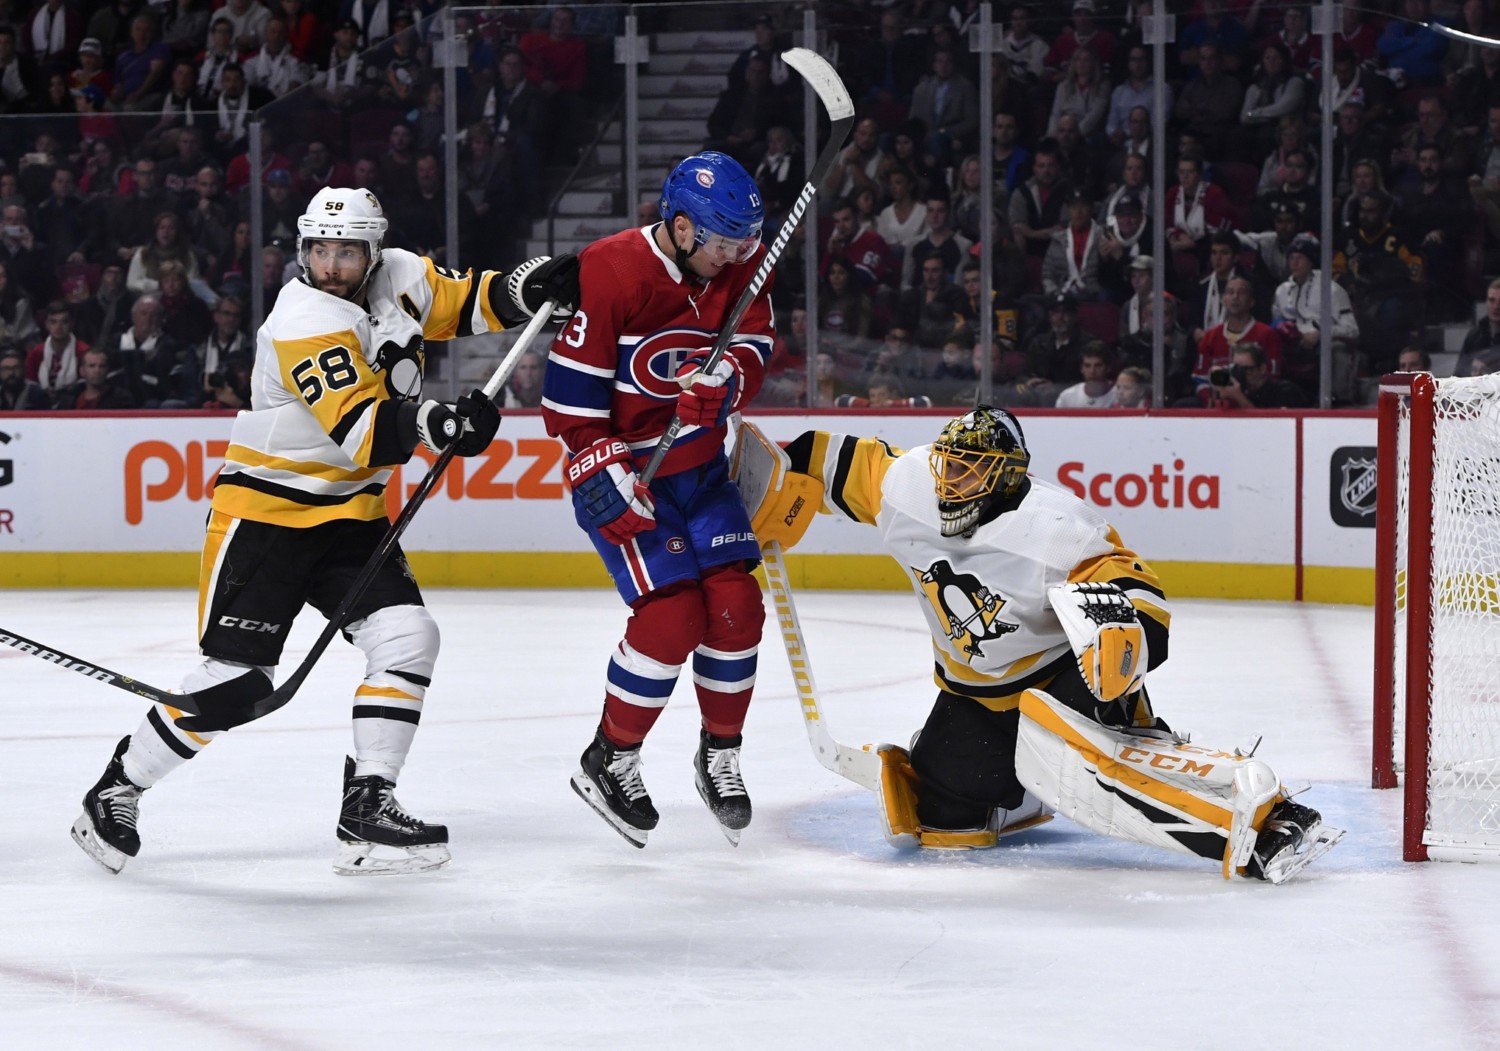 The Montreal Canadiens are one of the teams interested in Kris Letang